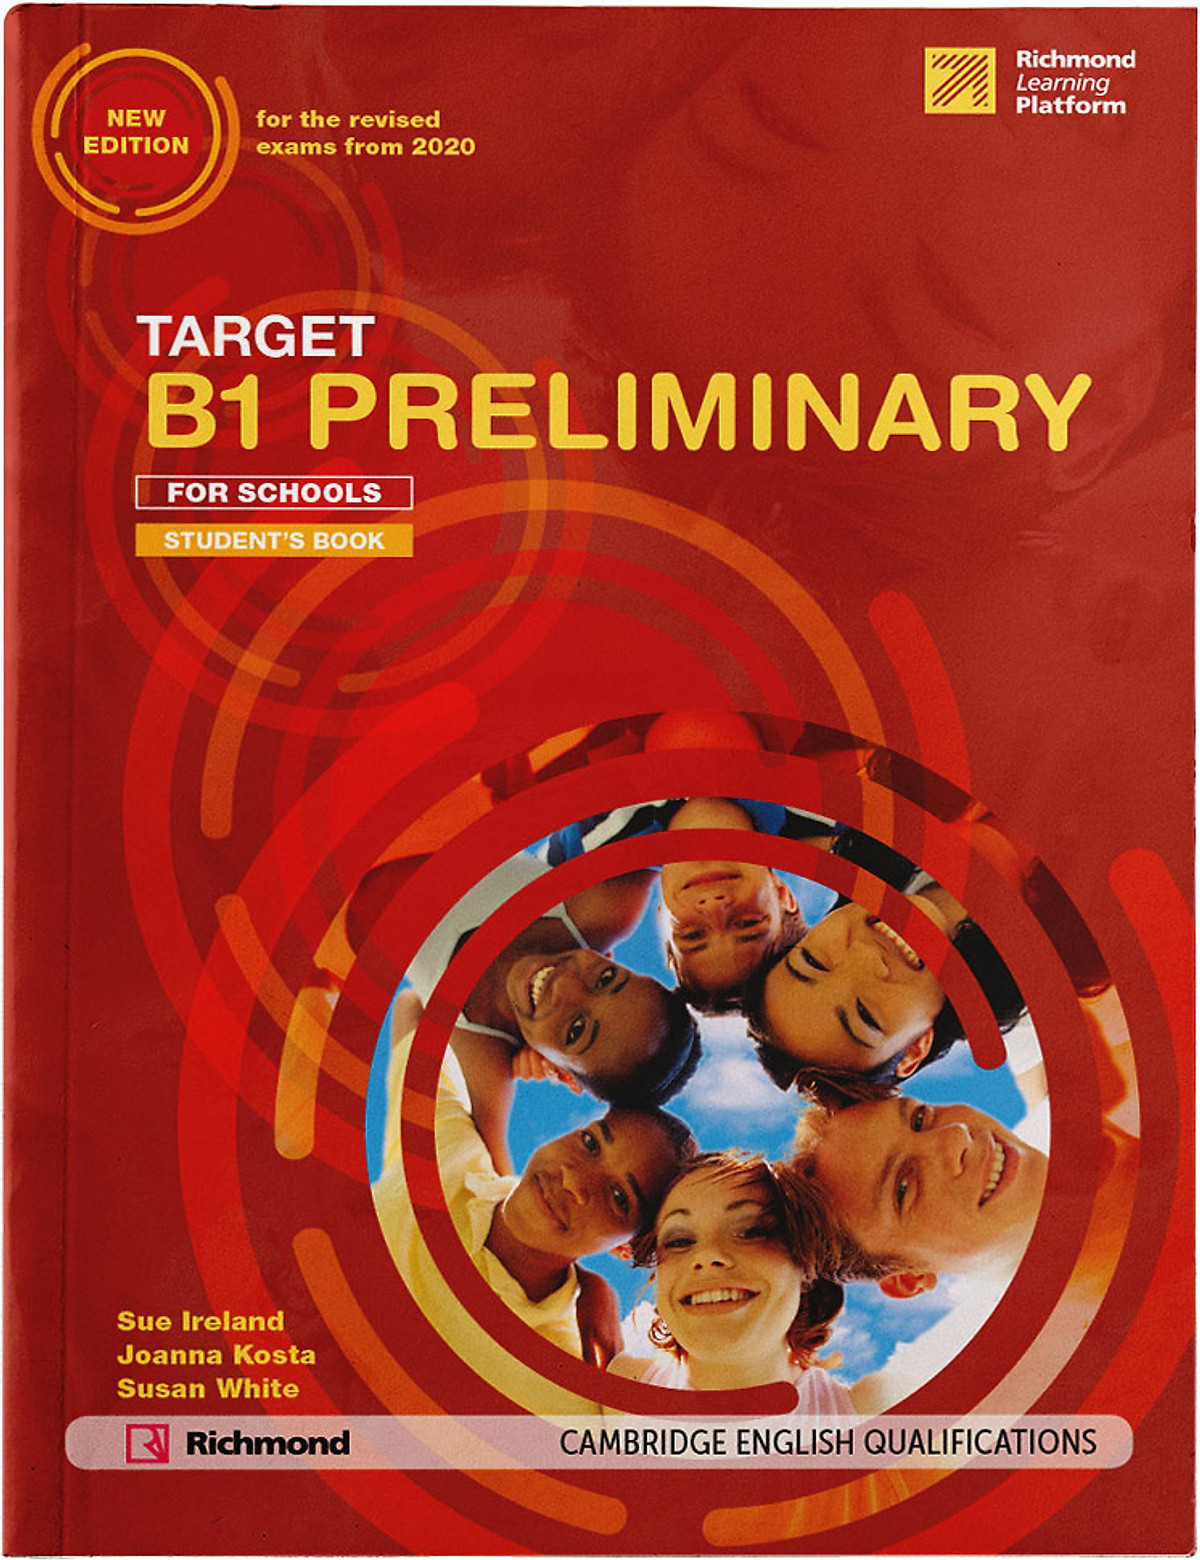 Target B1 Preliminary Student’s Book with platform code